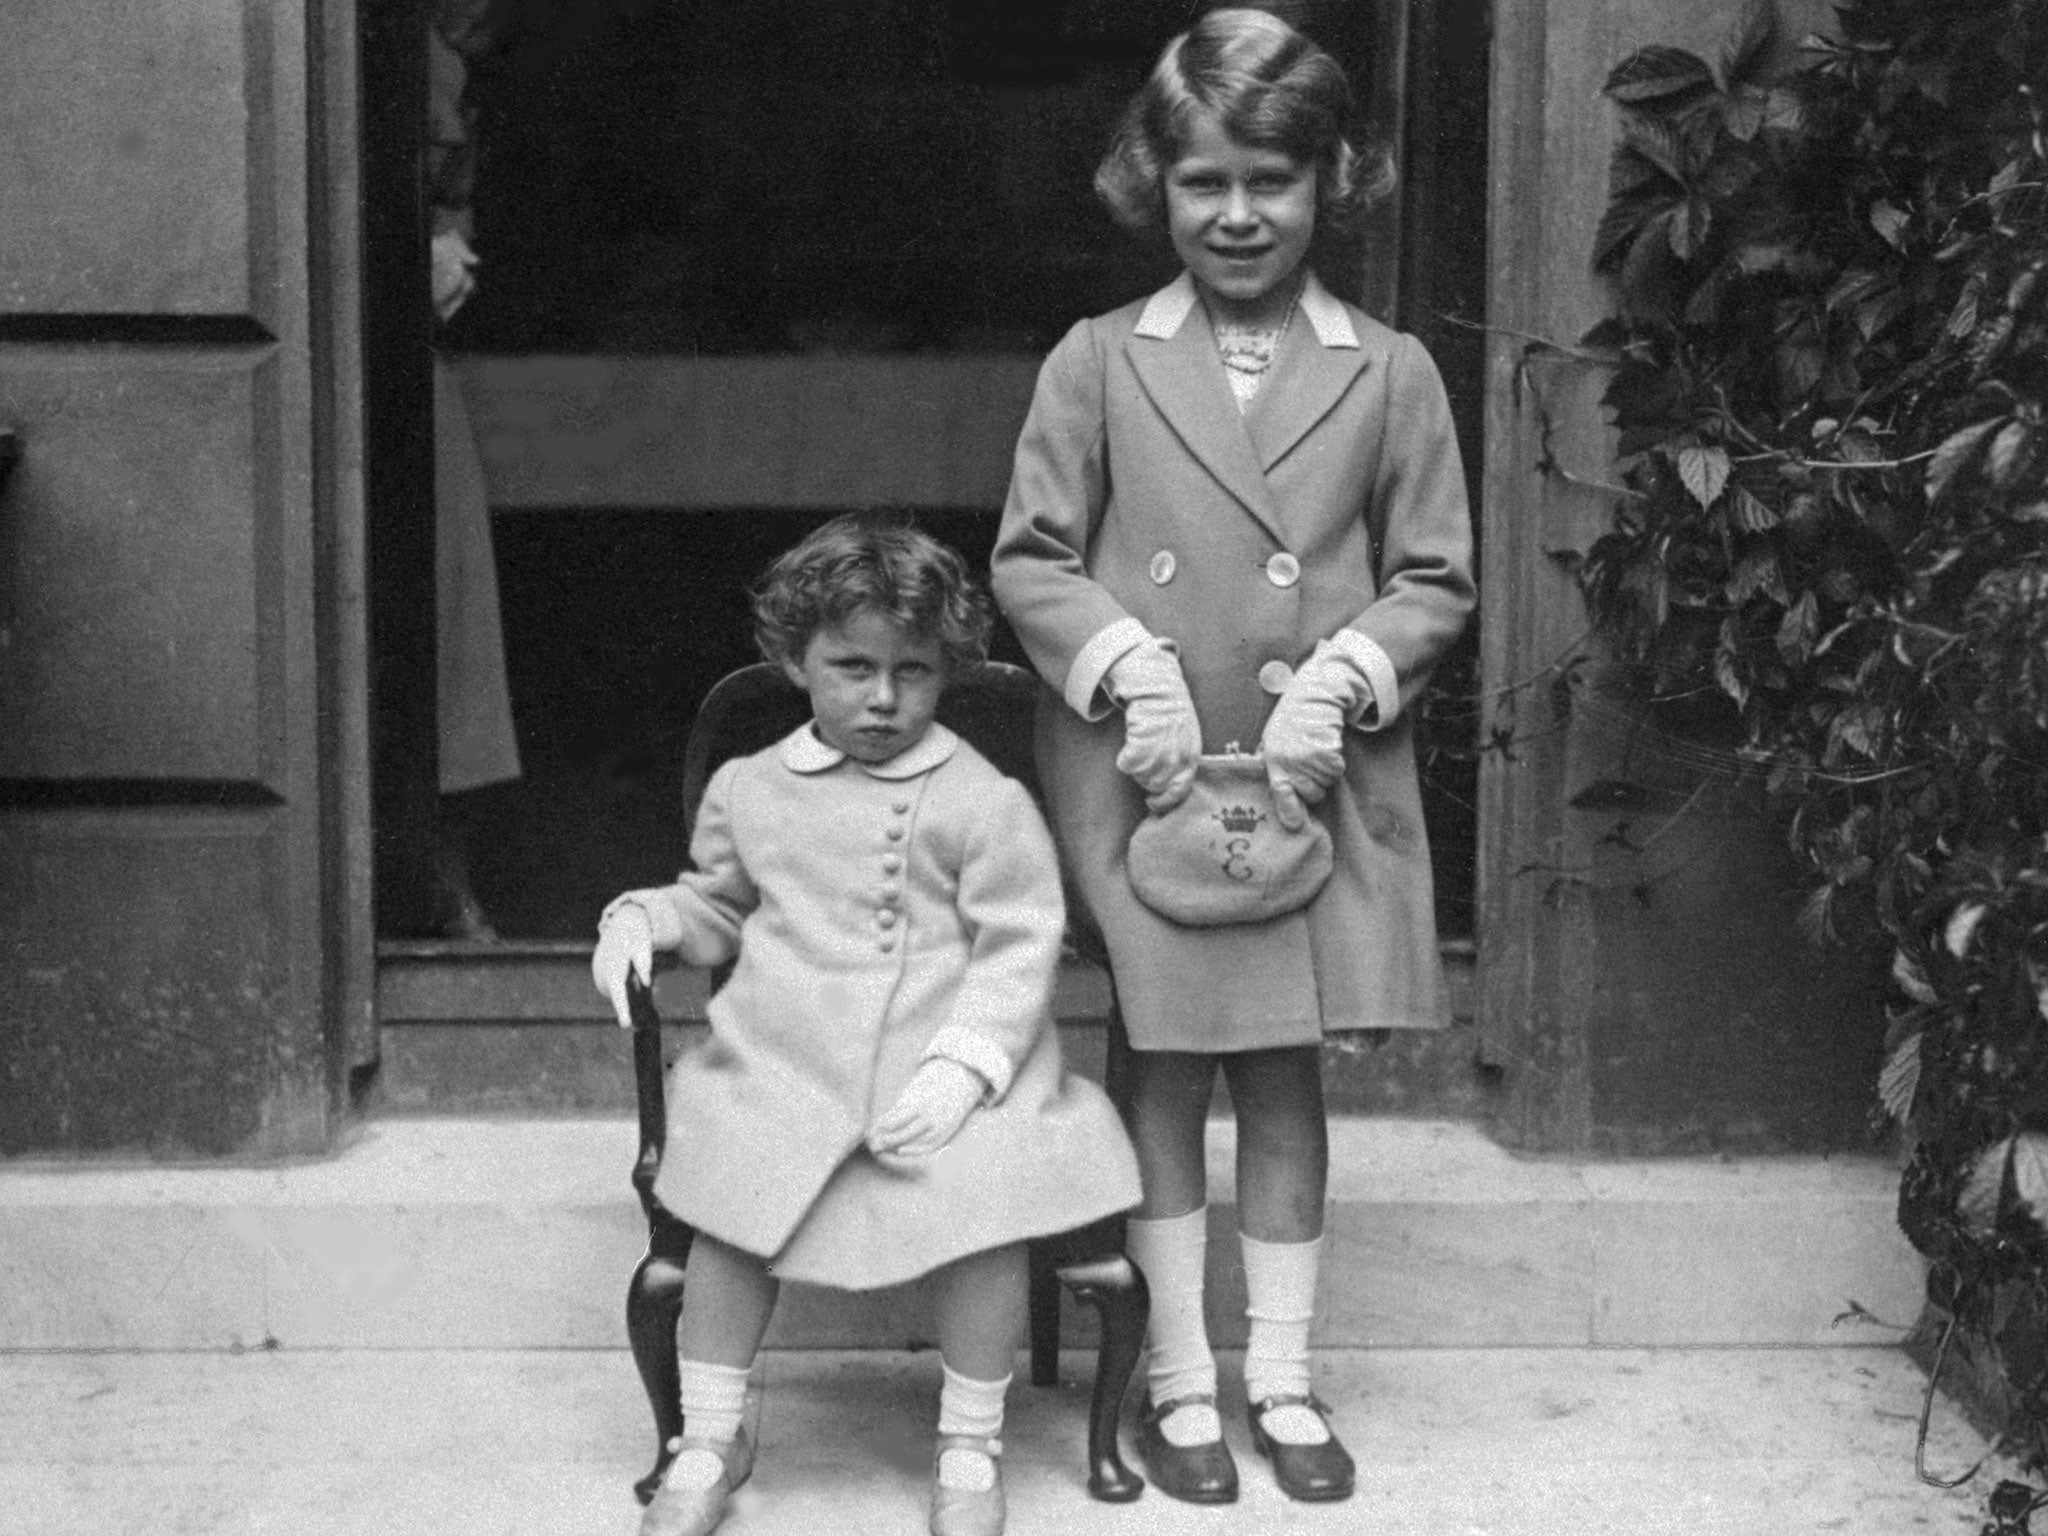 The future Britain's Queen Elizabeth II (right) pictured with her younger sister Princess Margaret (left) in 1933